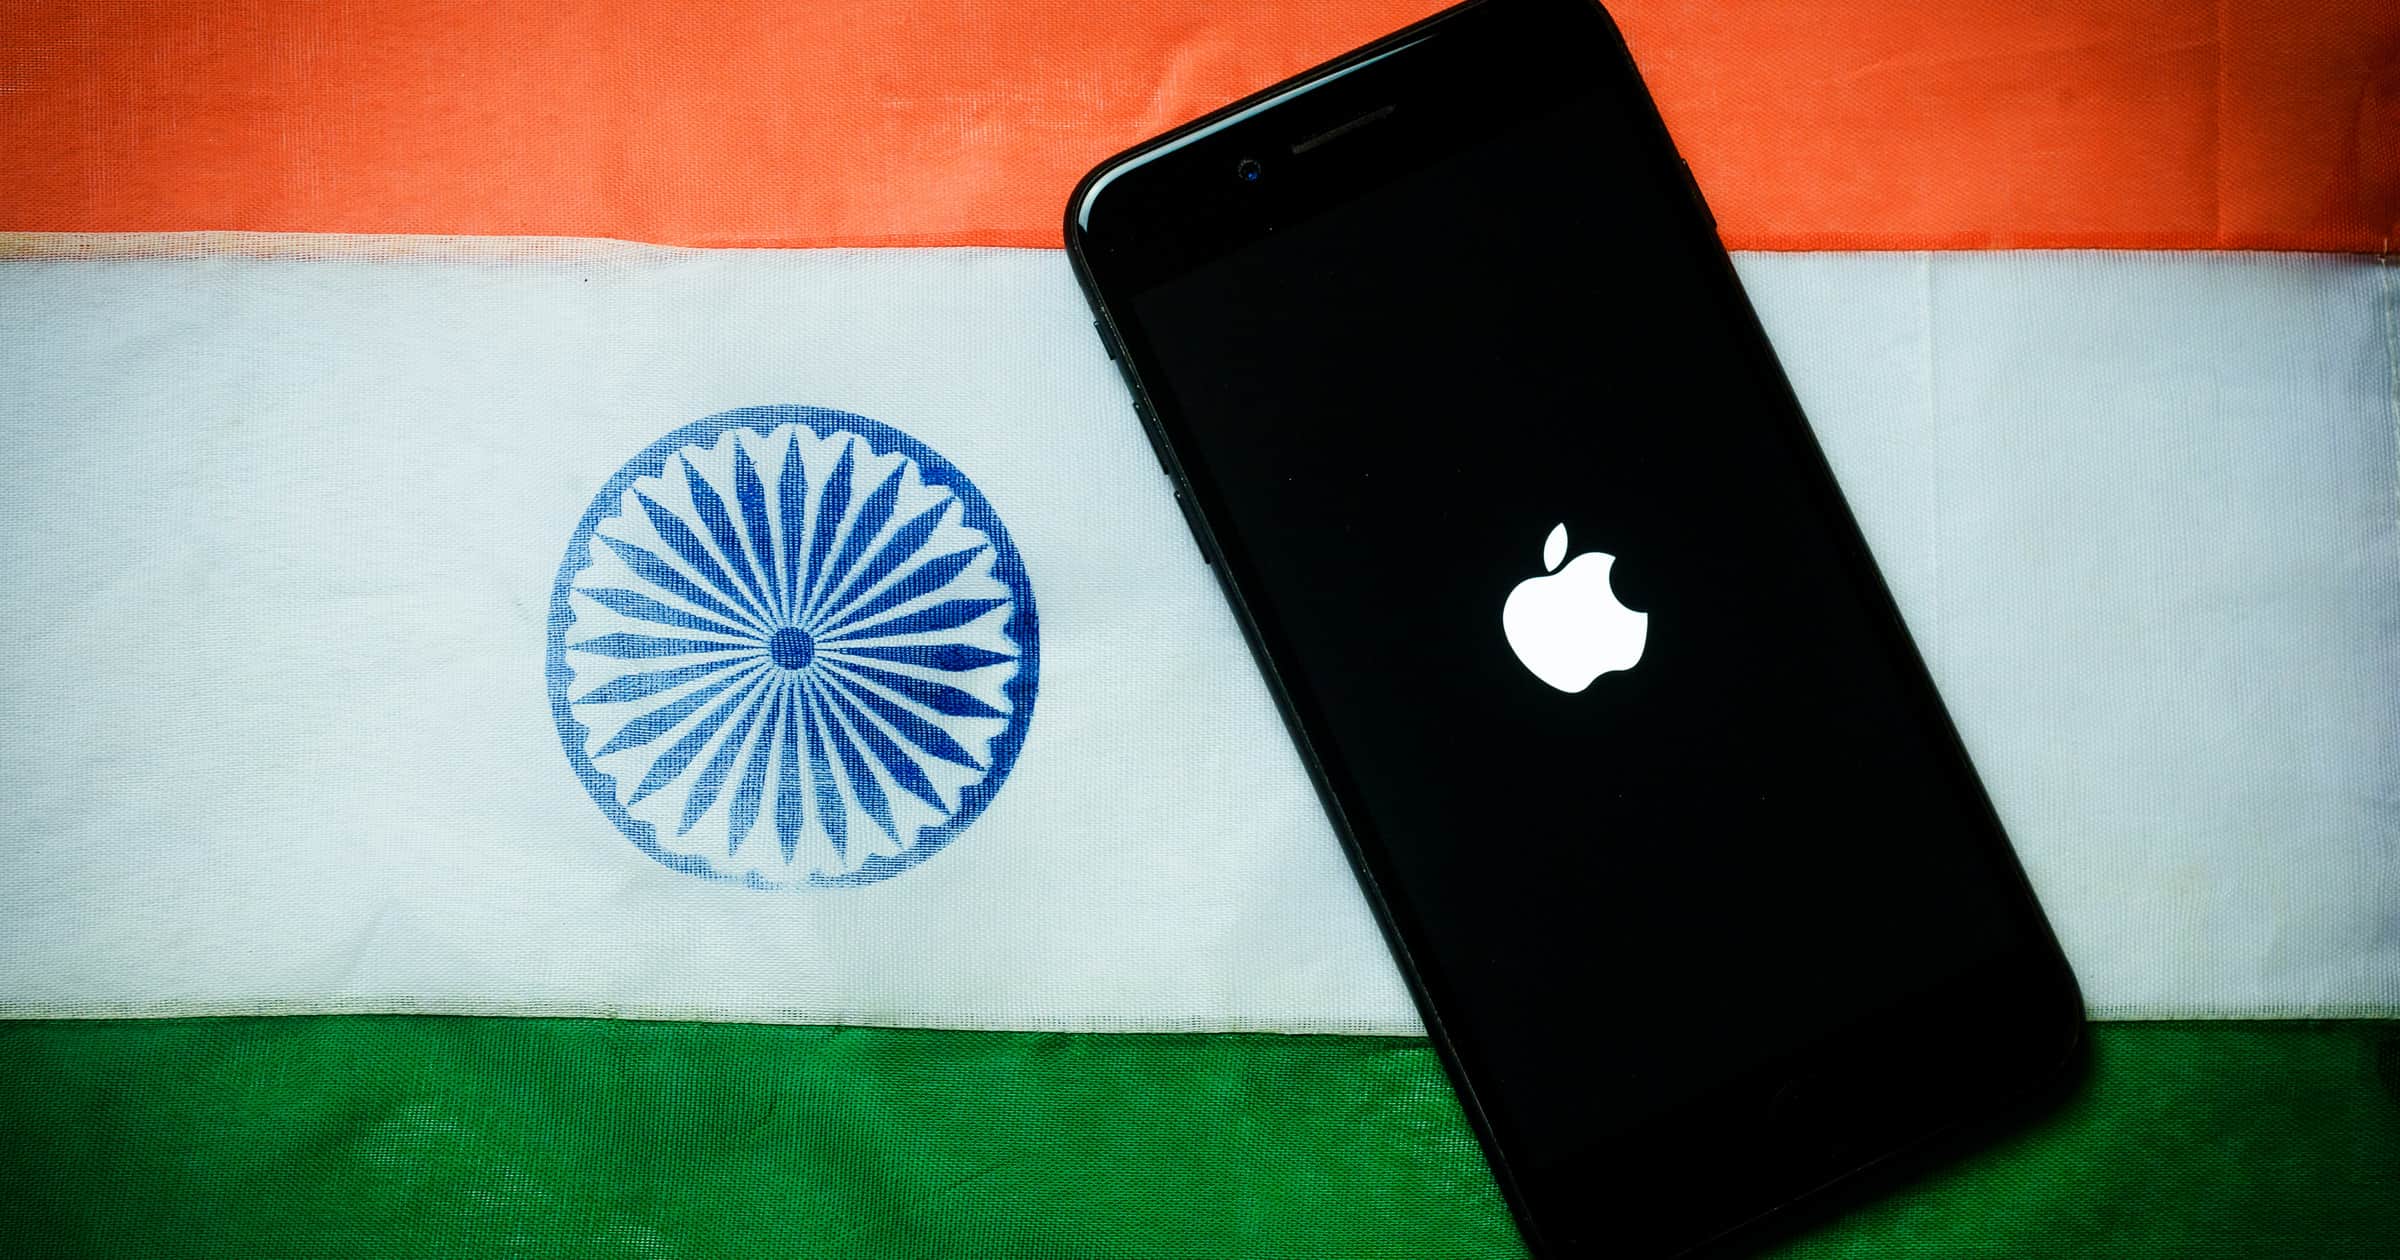 Apple iPhone on Indian flag